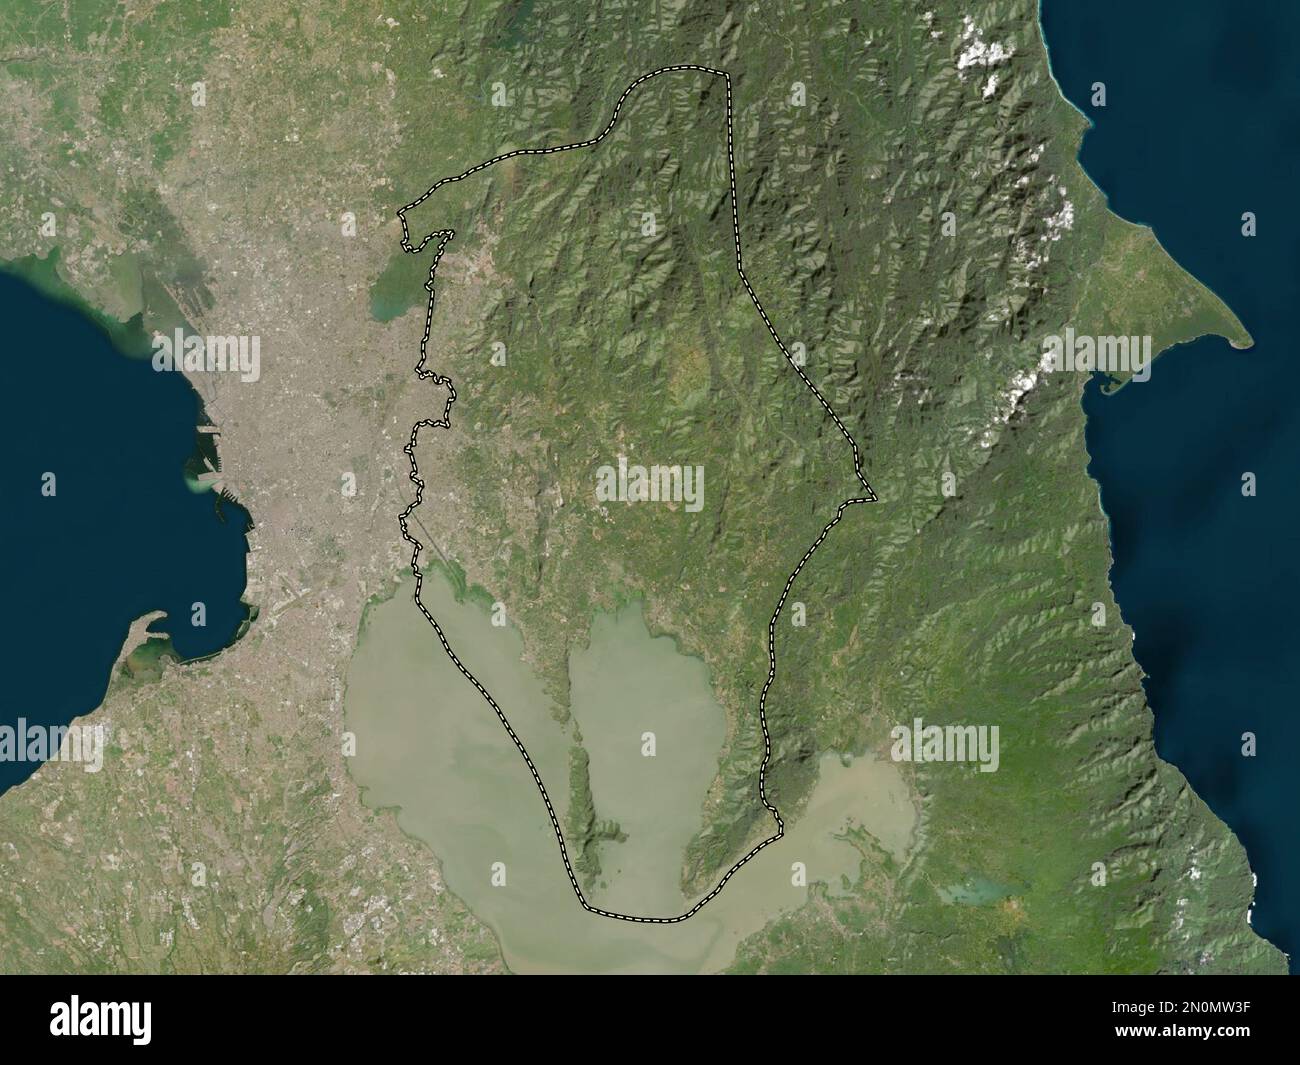 Rizal, province of Philippines. Low resolution satellite map Stock Photo